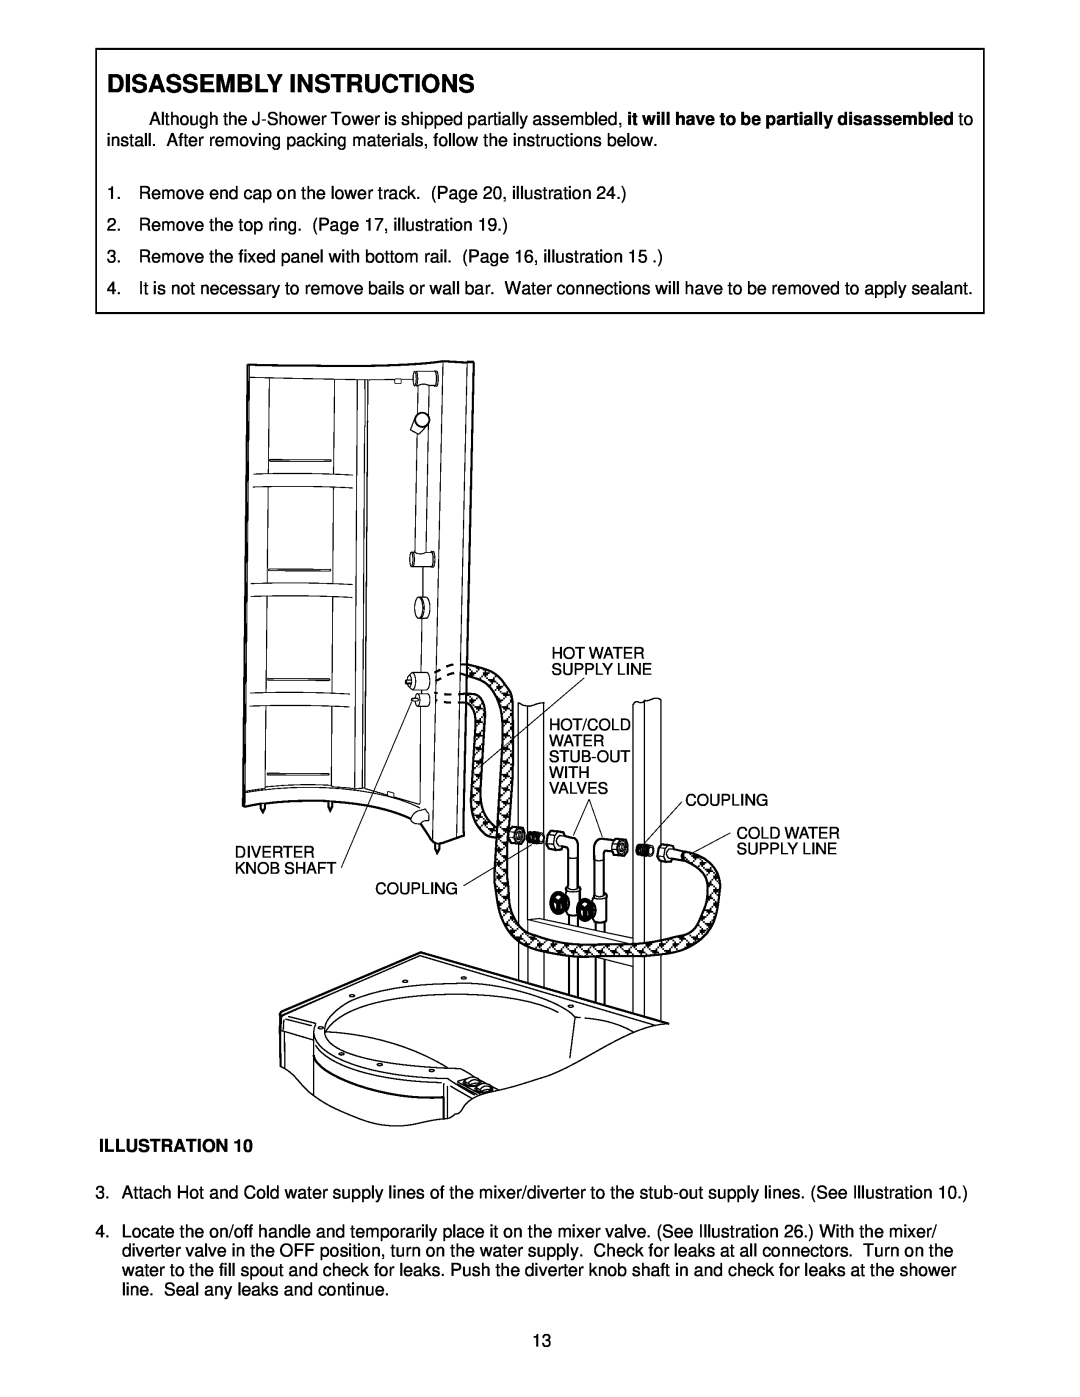 Jacuzzi J-SHOWER TOWERTM manual Disassembly Instructions 